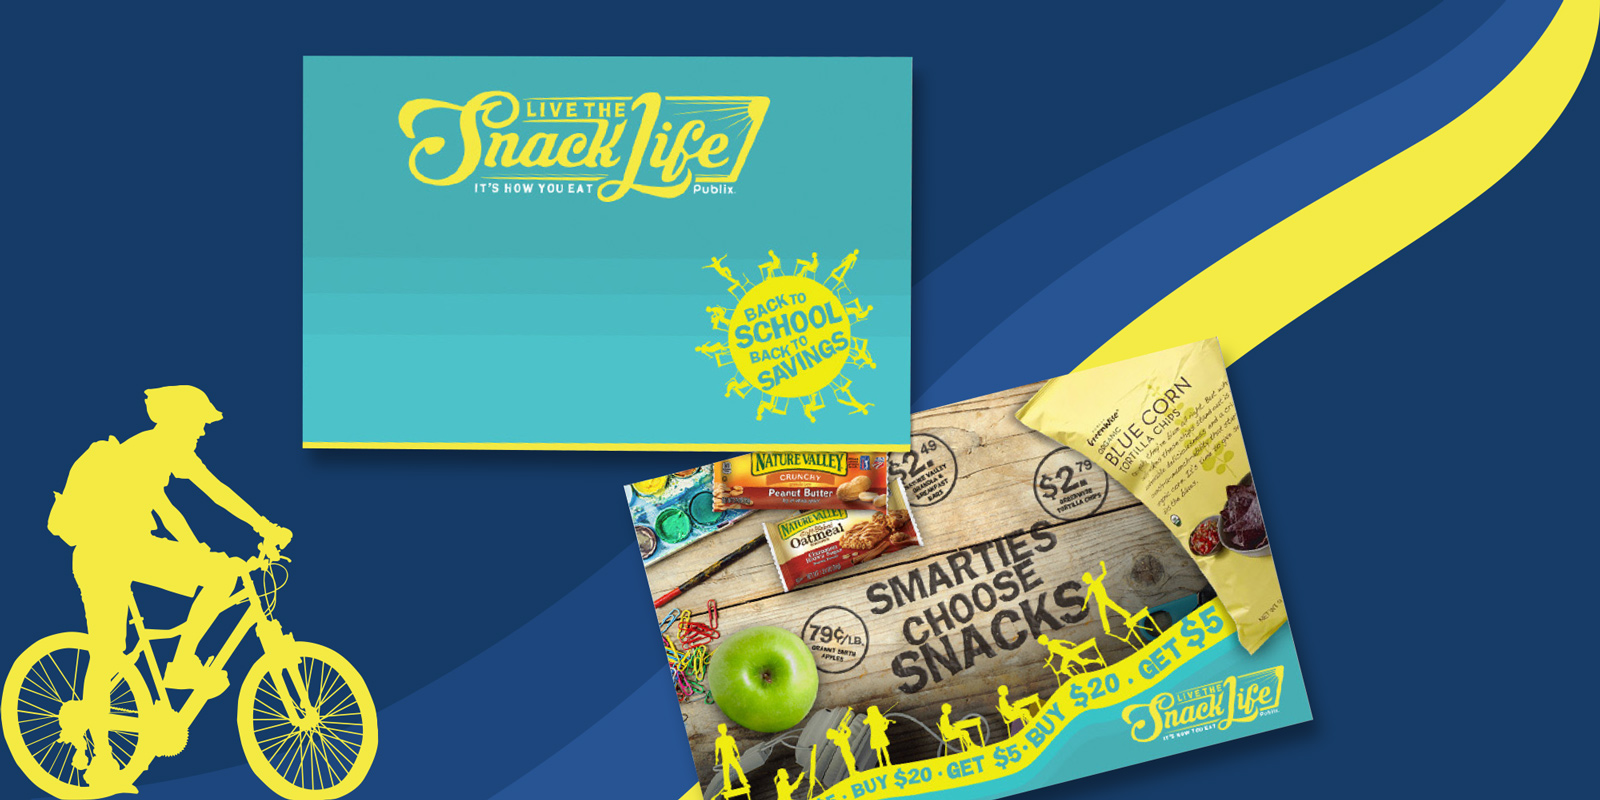 General Mills Snack Life Coupon Book